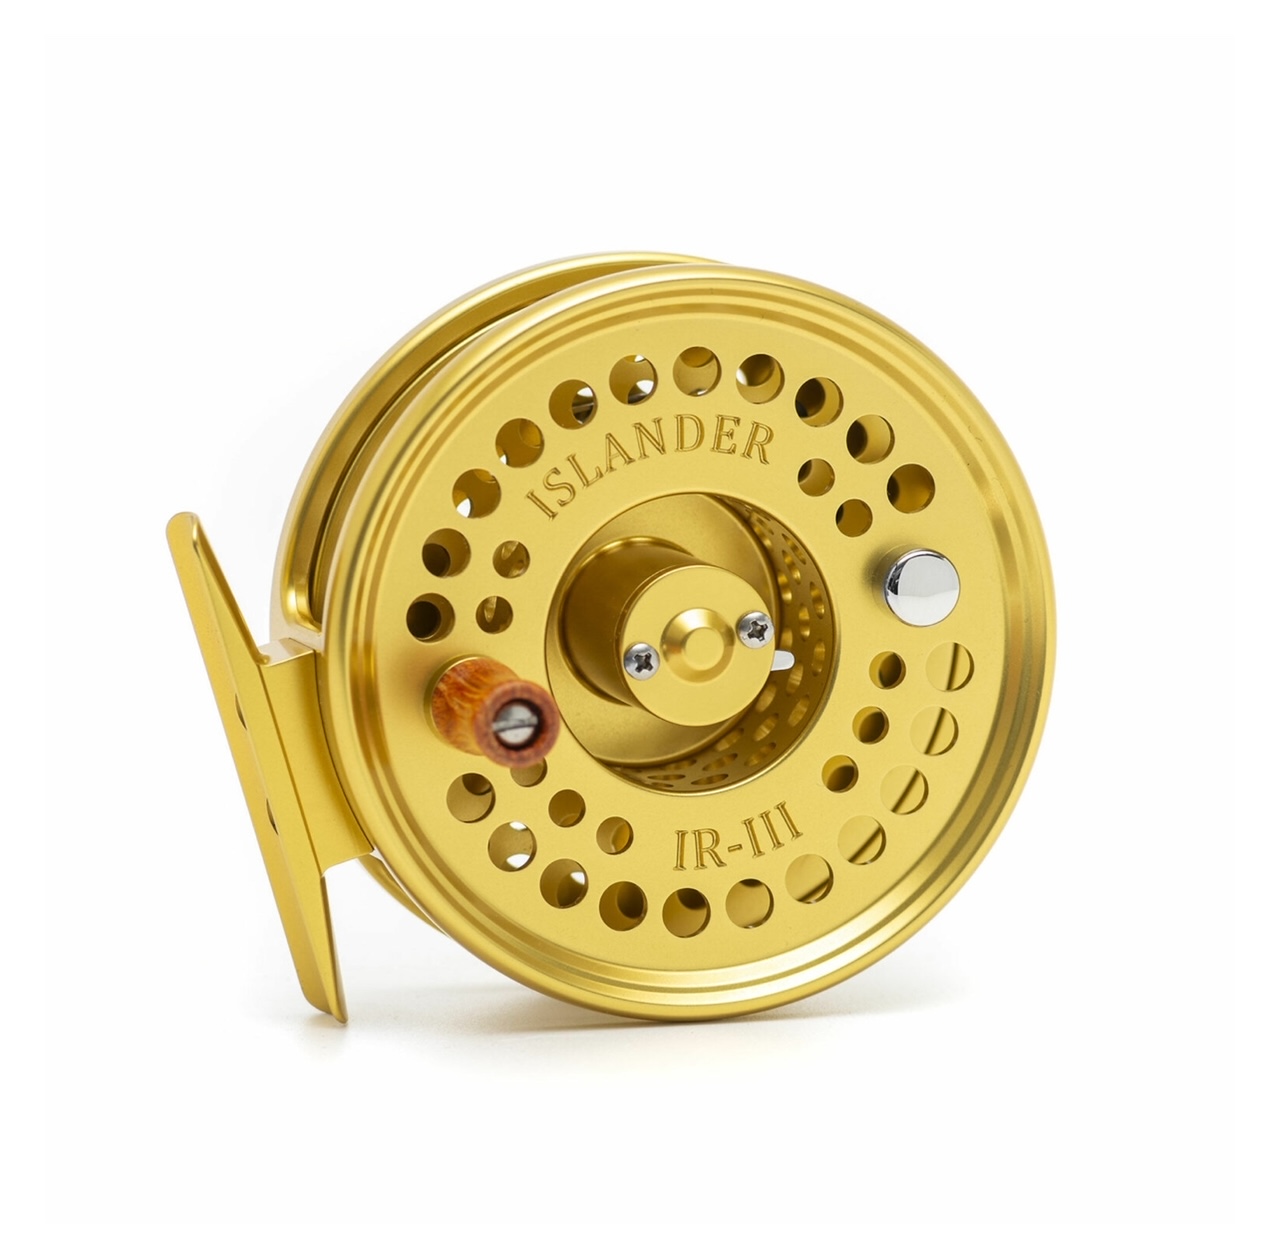 Sage Trout Spey Reel - Royal Treatment Fly Fishing